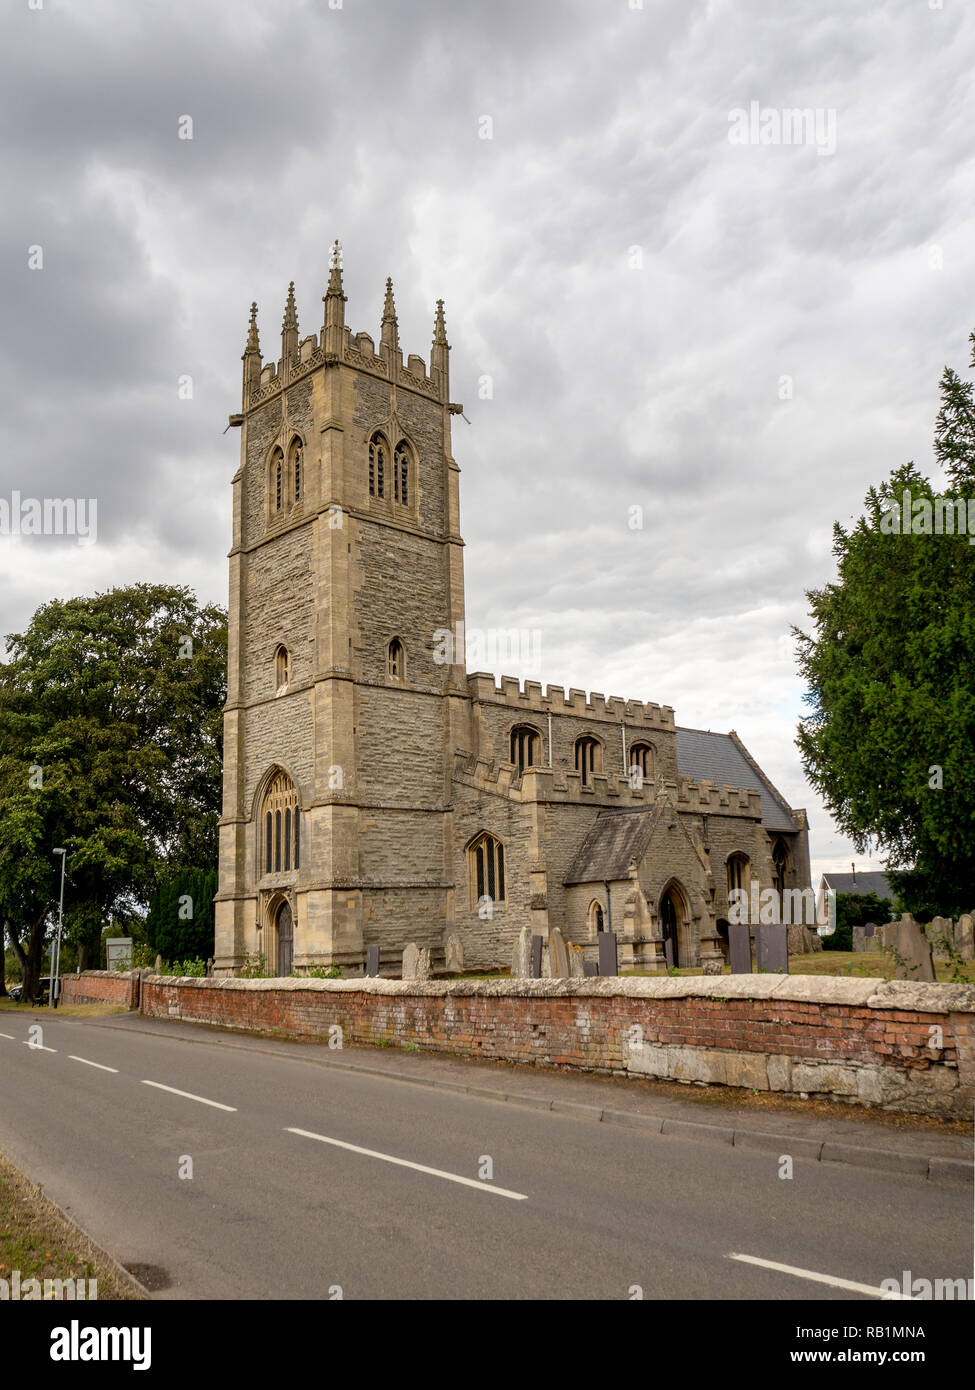 All Saints medieval, gothic church in Hawton, near Newark-on-Trent, Nottinghamshire, England, UK. The church is regarded as a building of outstanding  Stock Photo